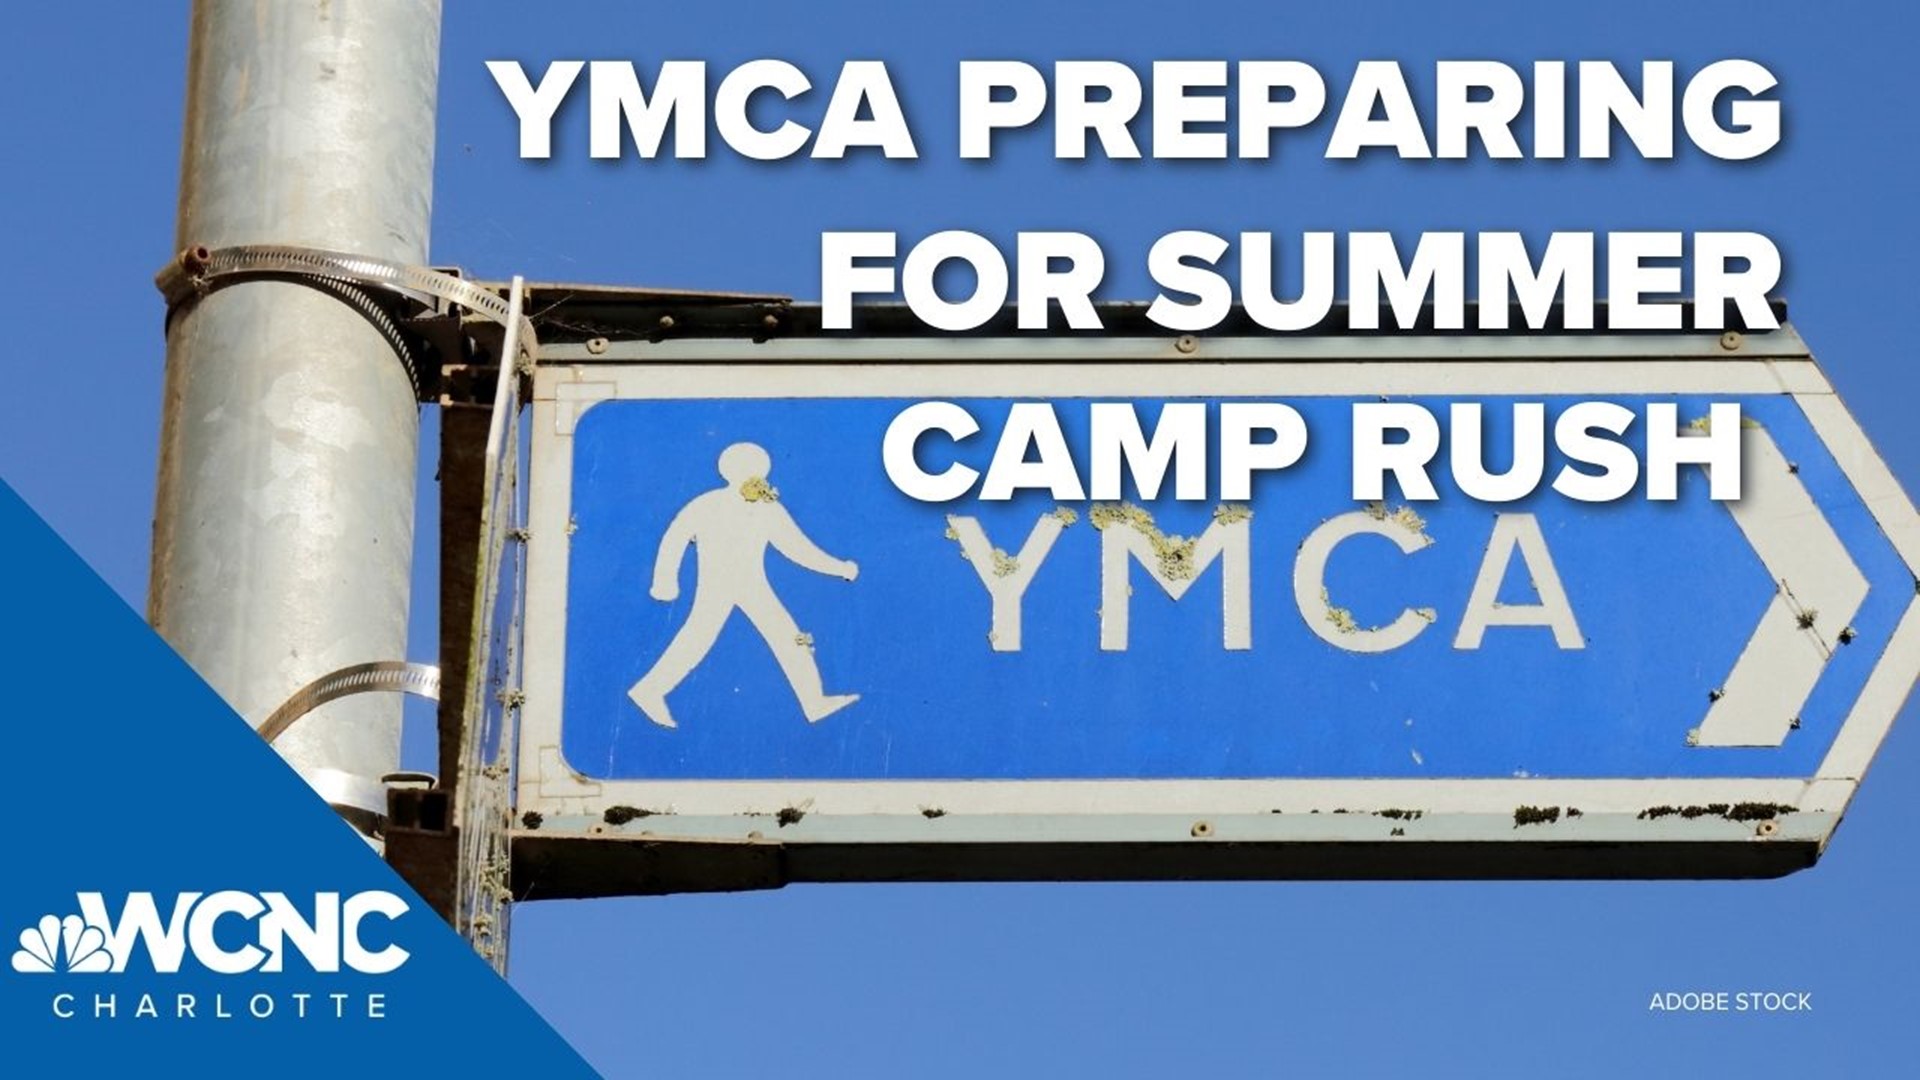 The nonprofit says it's expecting some of its biggest enrollment numbers for summer camp, after a record turnout last year.